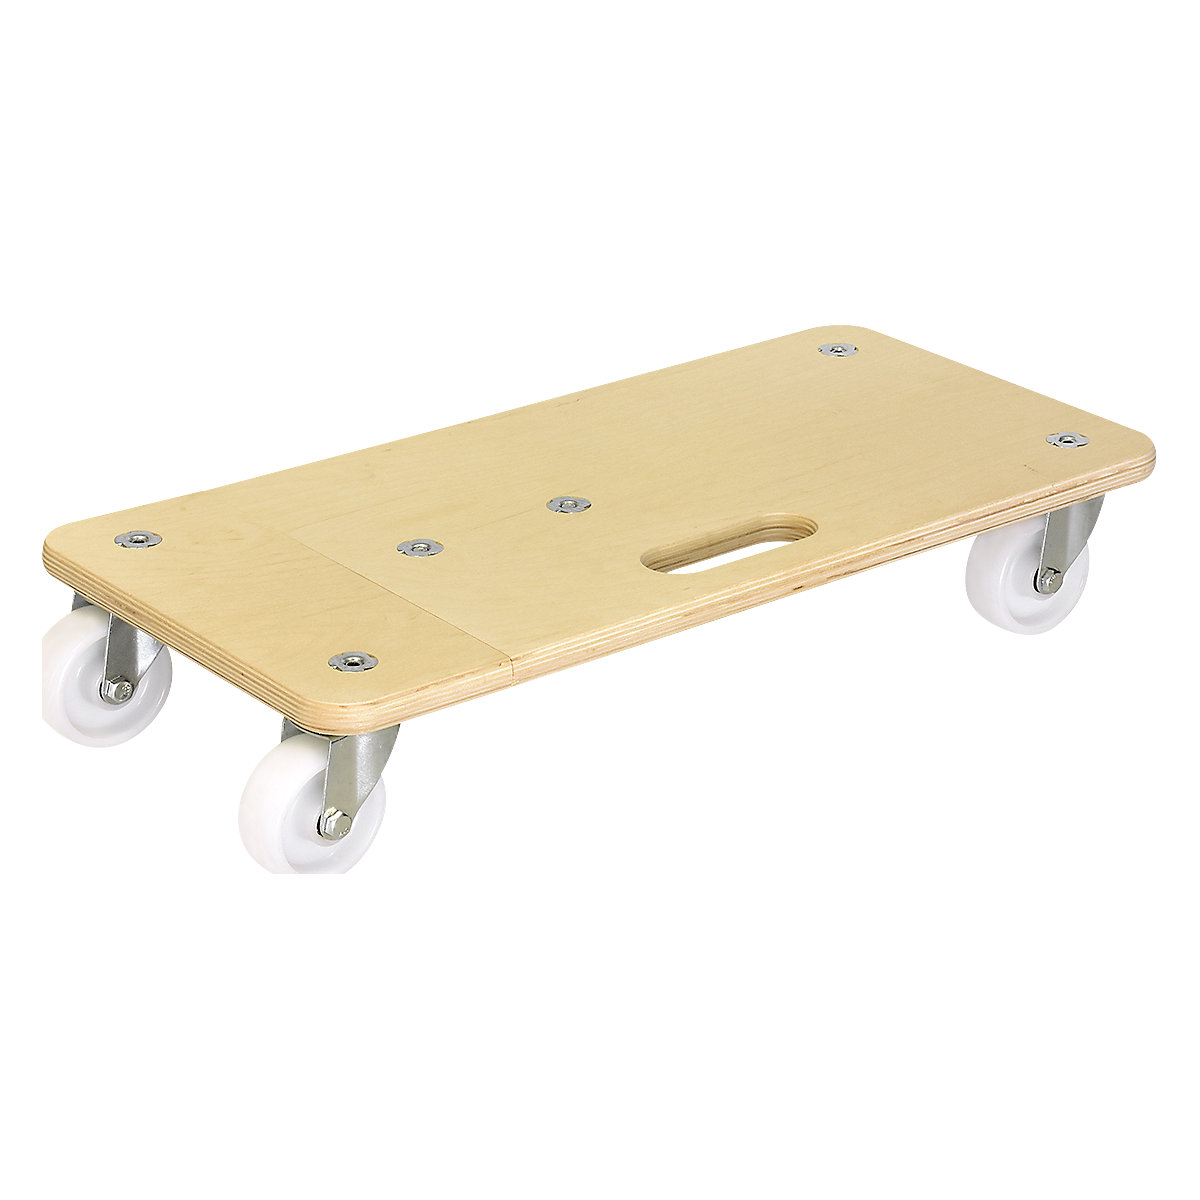 MM 1331 extendable transport dolly - Wagner